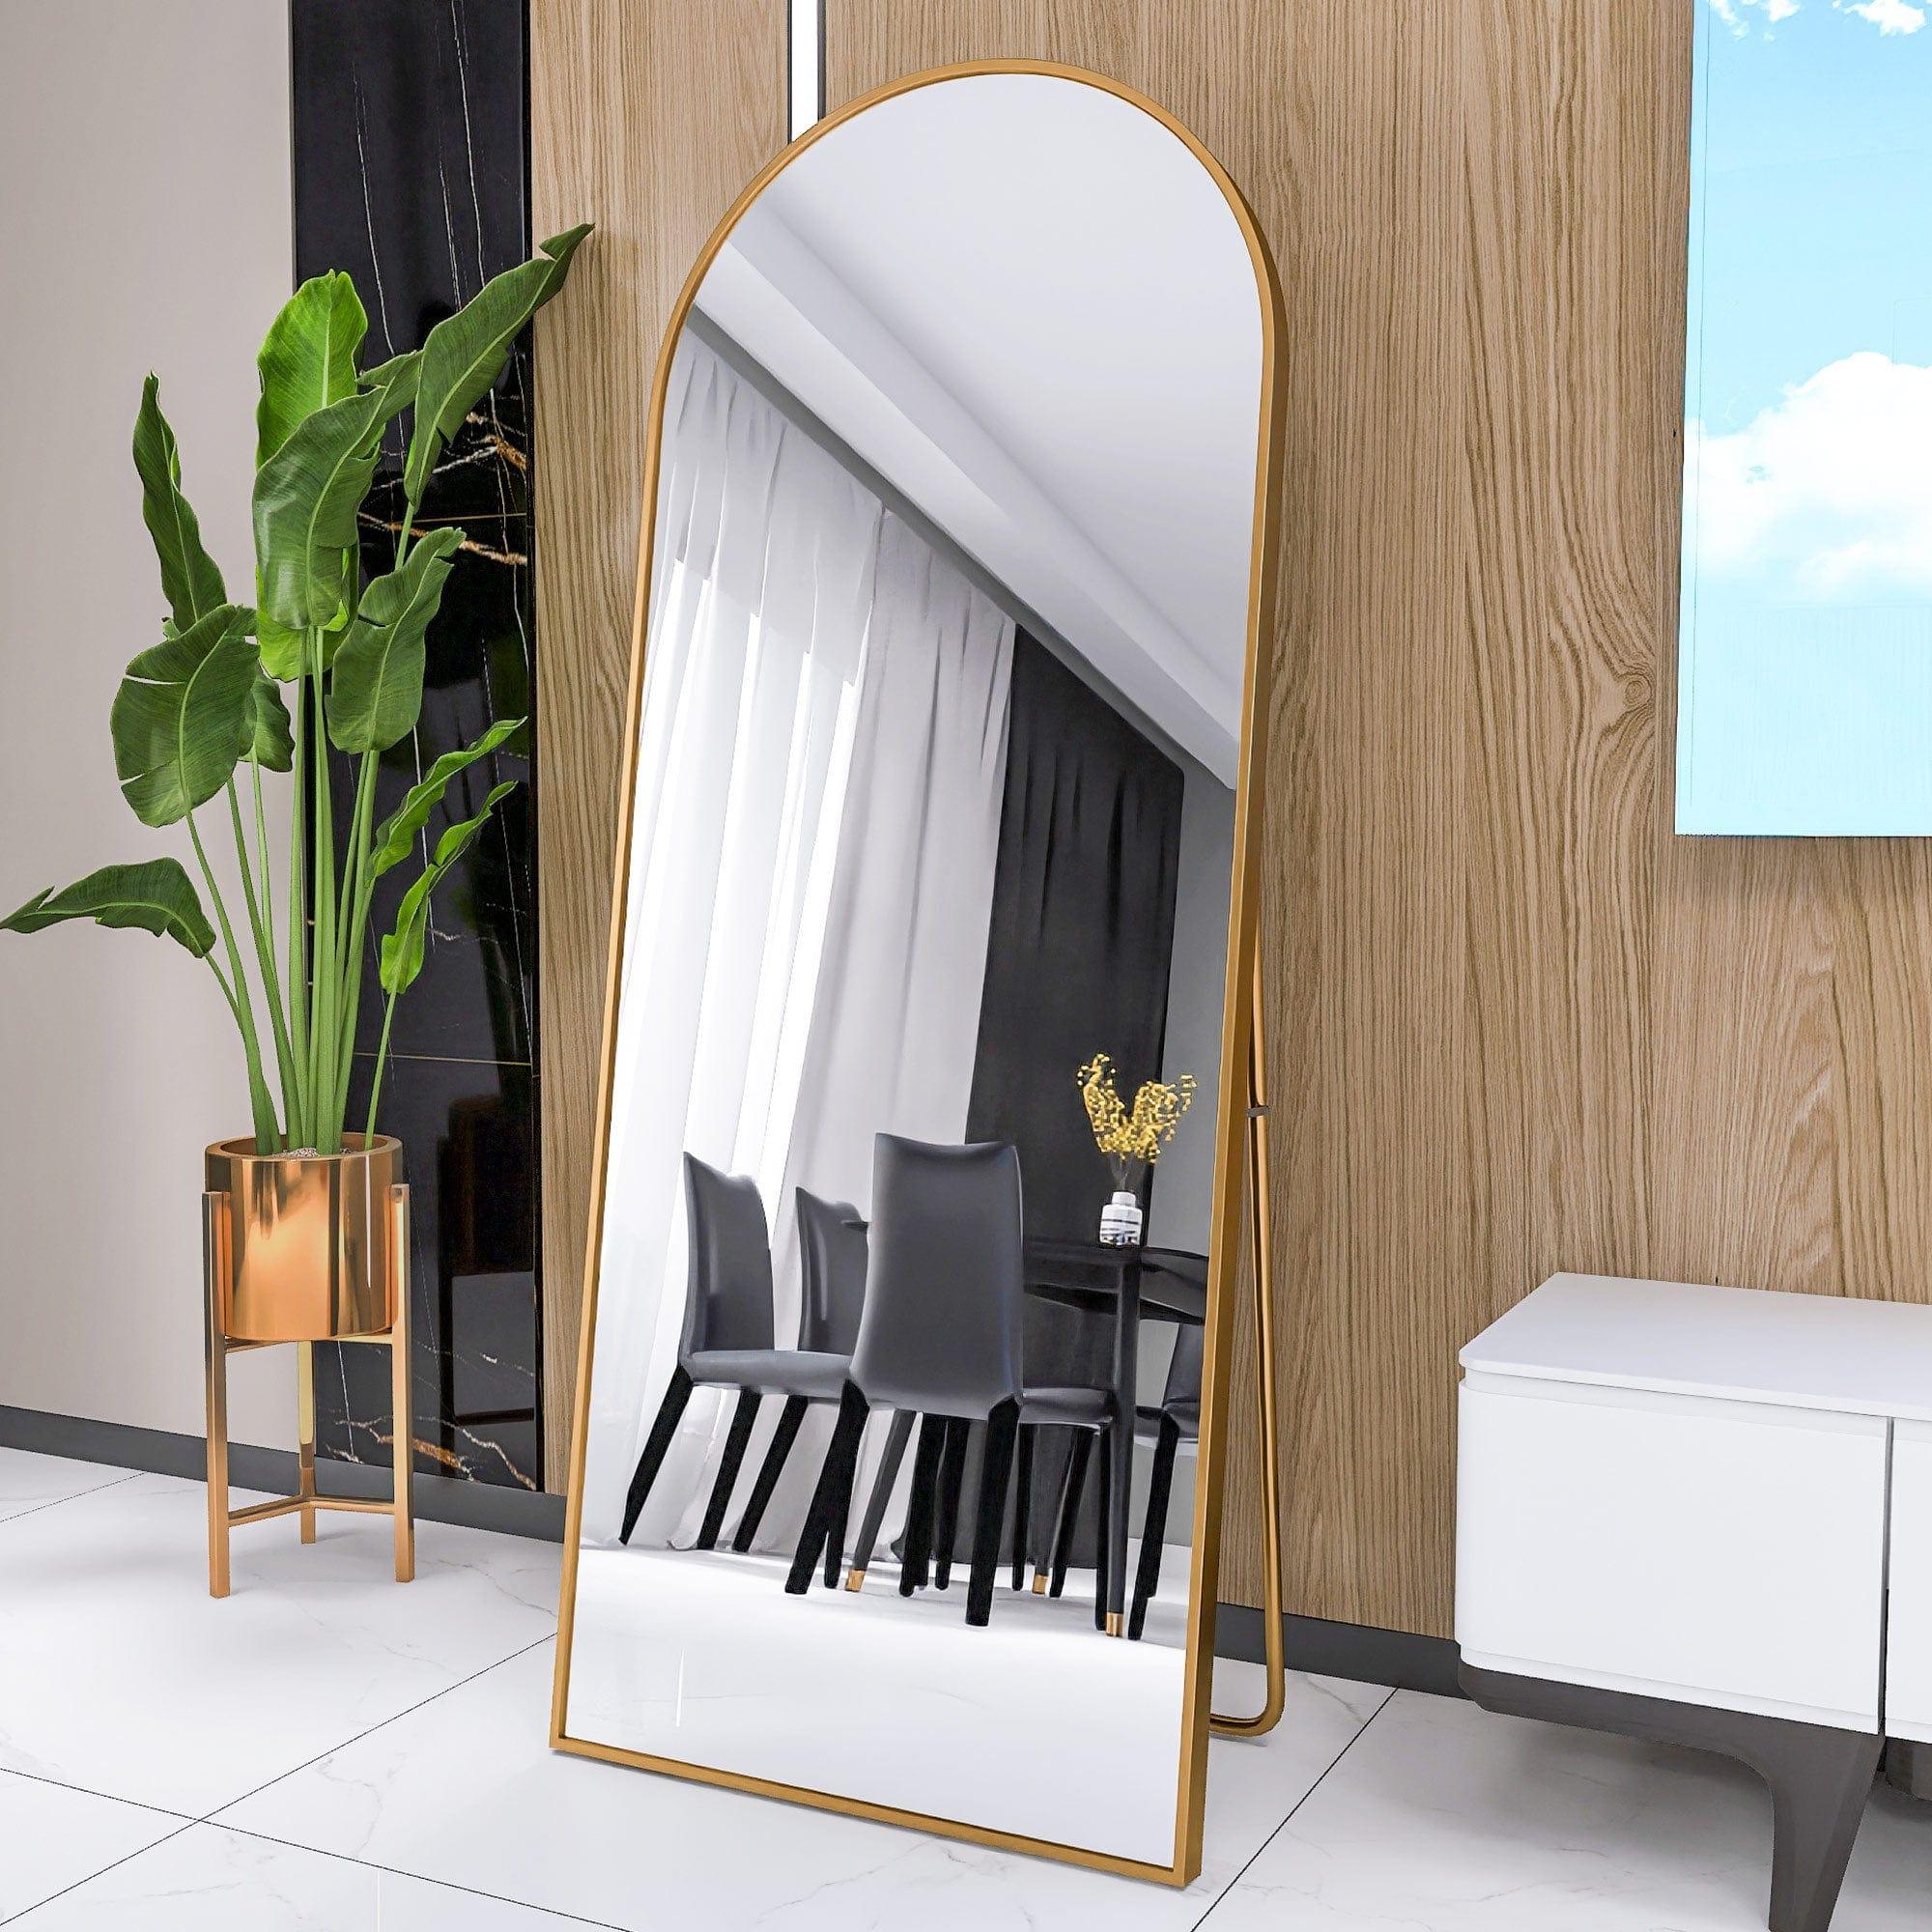 Shop Arched Full Length Mirror Floor Mirror Hanging Standing or Leaning, Bedroom Mirror Wall-Mounted Mirror Dressing Mirror with Gold  Aluminum Alloy Frame, 65" x 23.6" Mademoiselle Home Decor